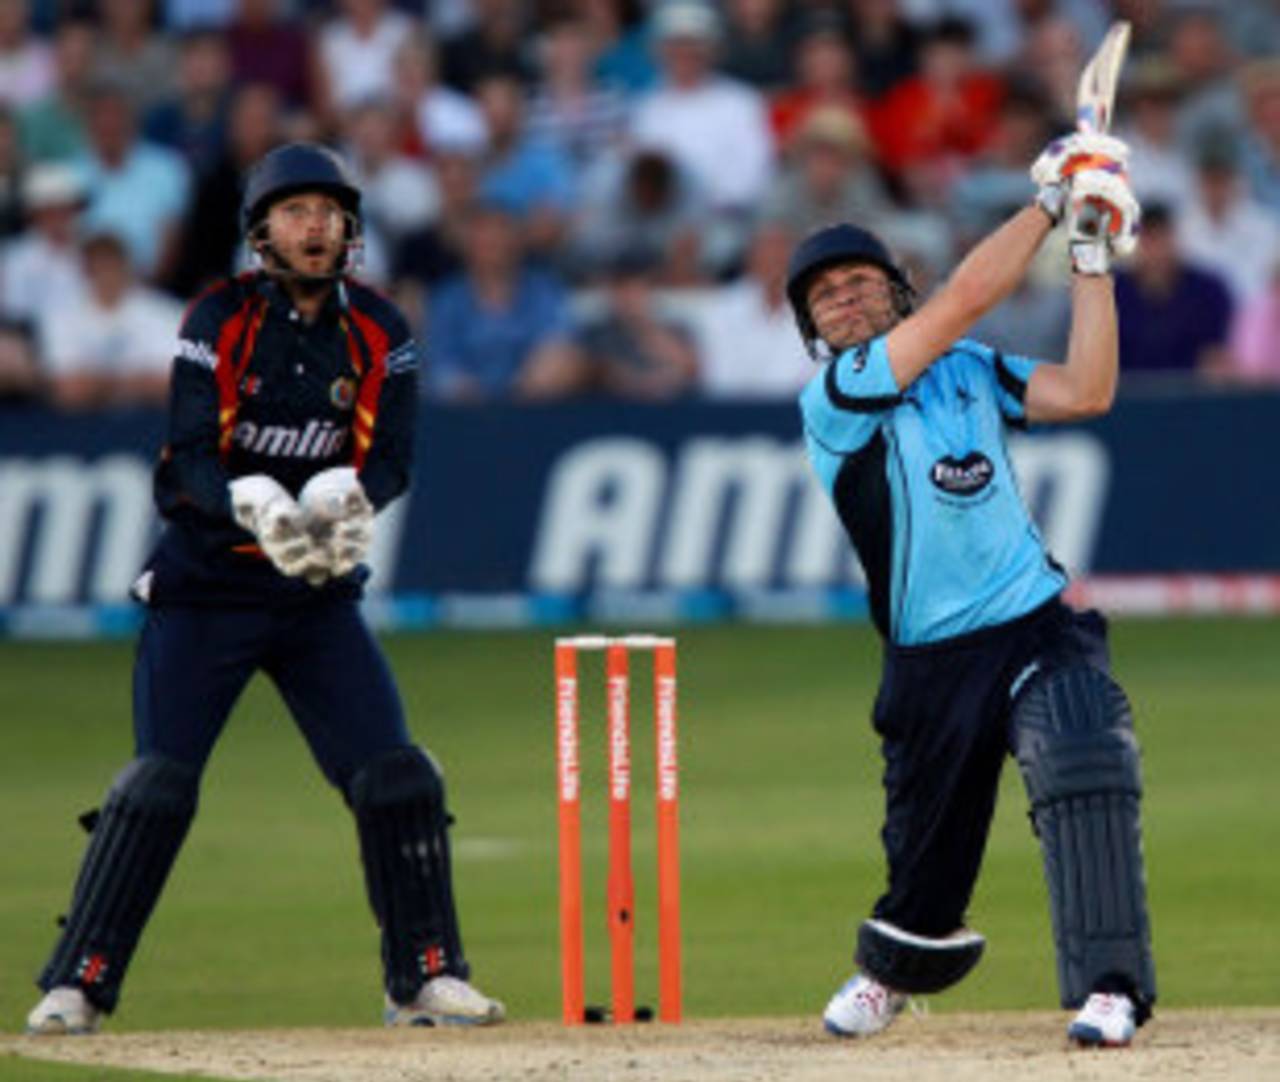 Luke Wright hits out during his innings of 46, Essex v Sussex, FLt20 South Group, June 28, 2012